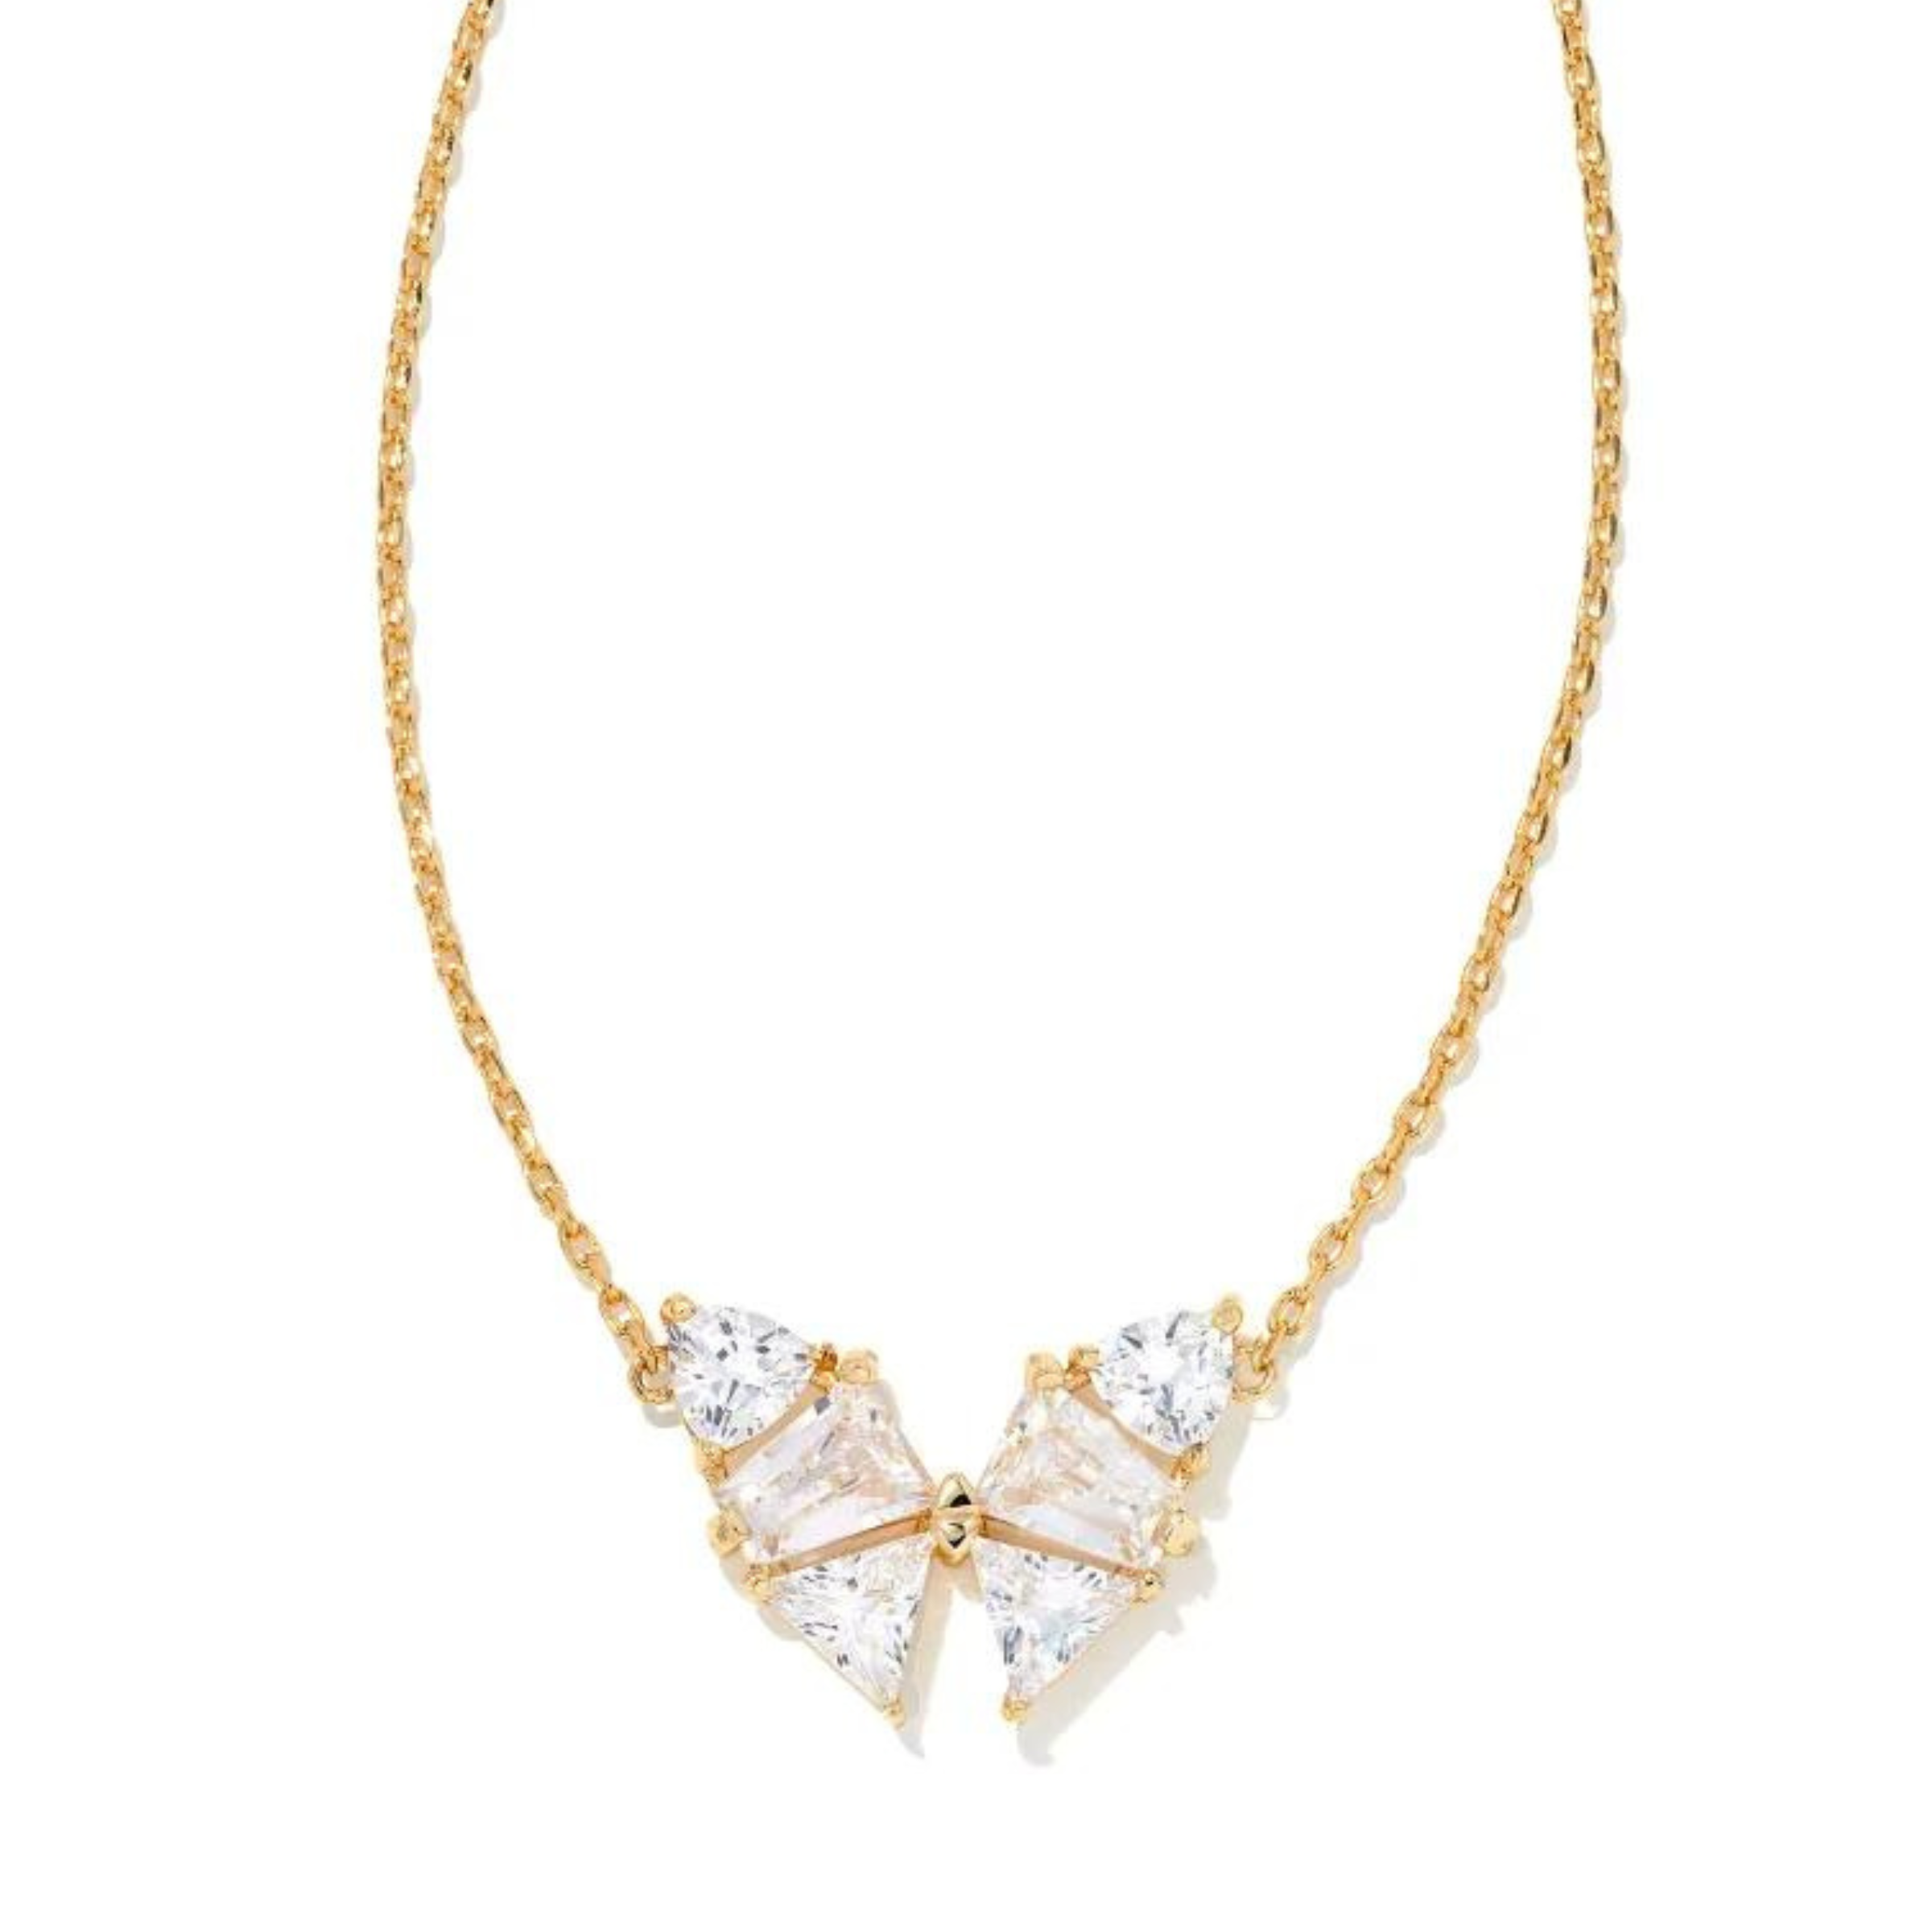 Gold chain necklace with a clear crystal butterfly pendant. This necklace is pictured on a white background. 